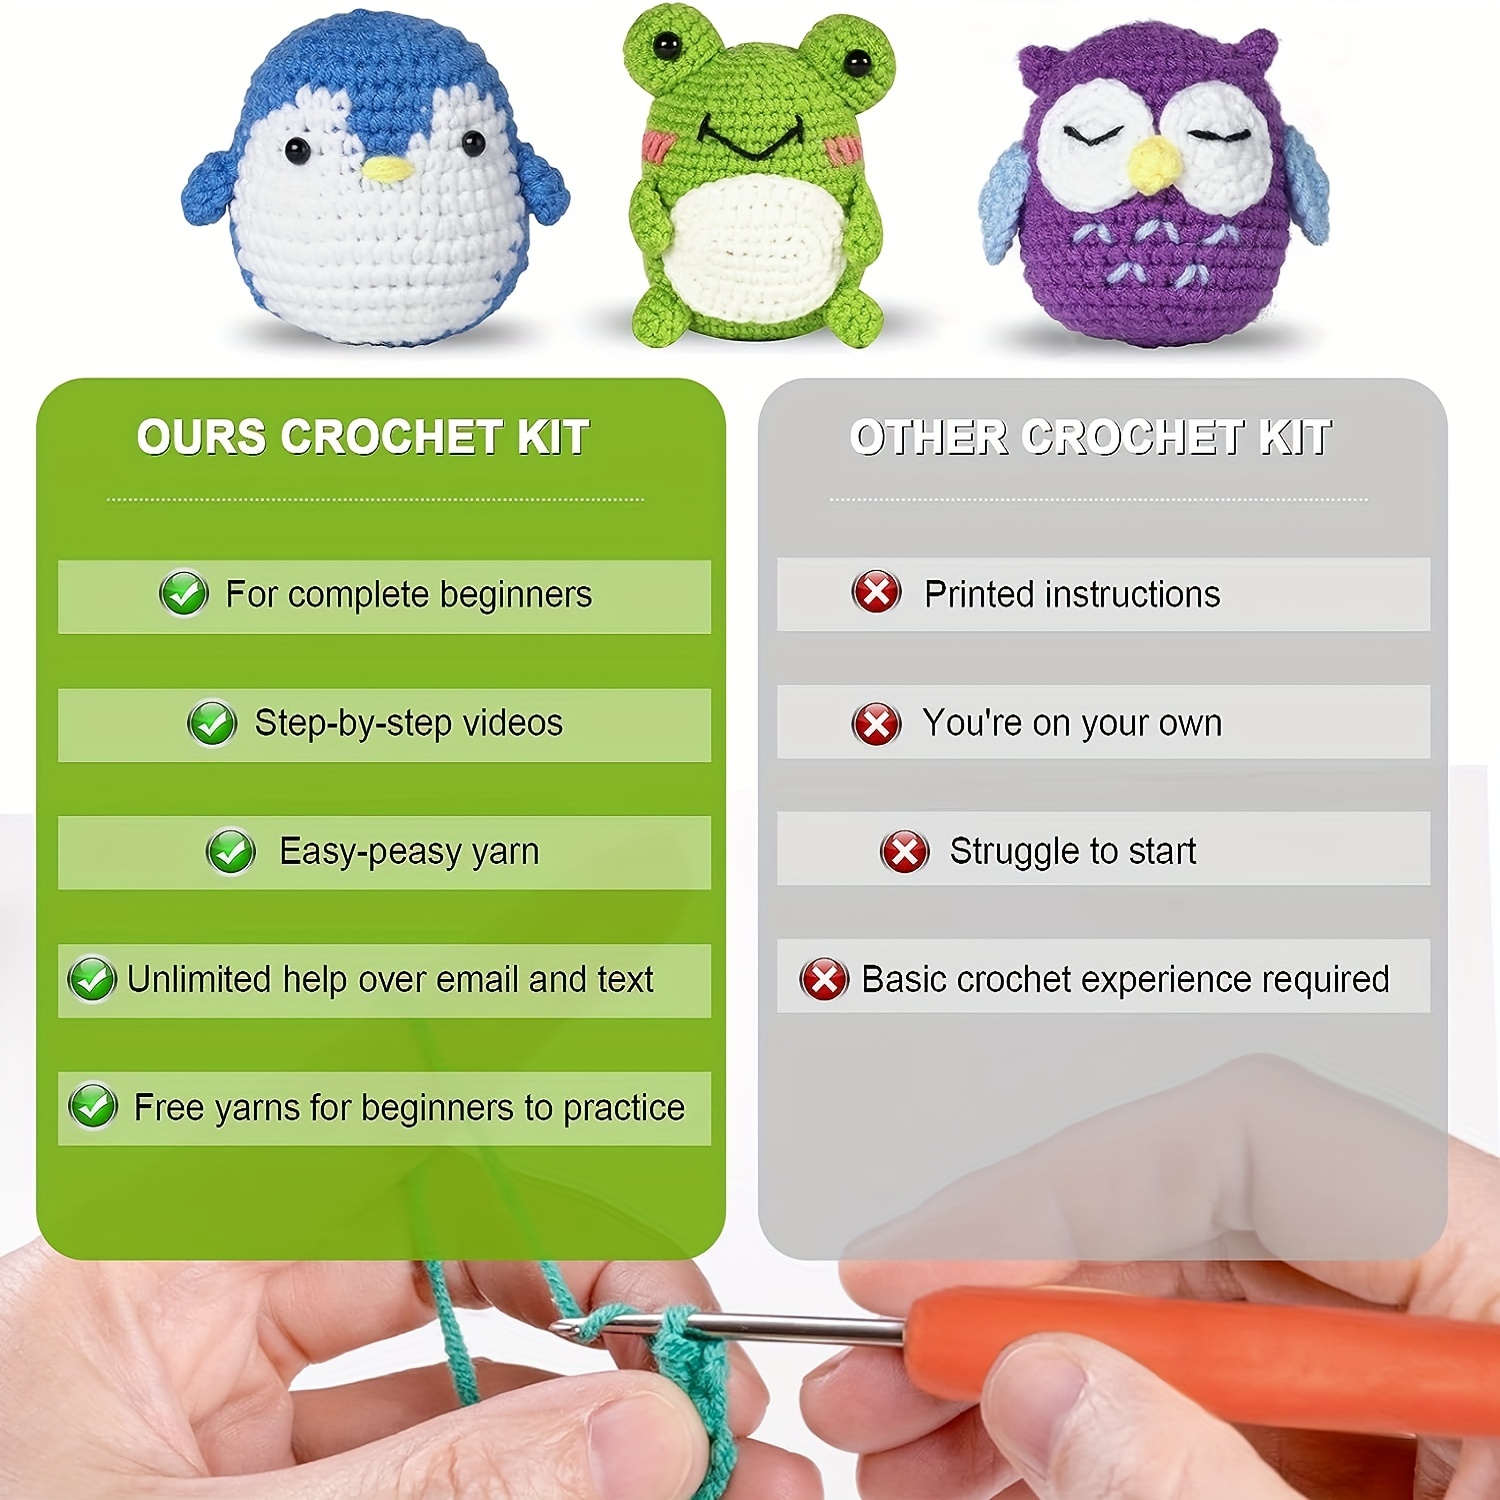 Woobles Crochet Kit For Beginners Woobles Crochet Kit Beginneranimal DIY  Beginner Crochet Kit With Easy Peasy Yarn And Video